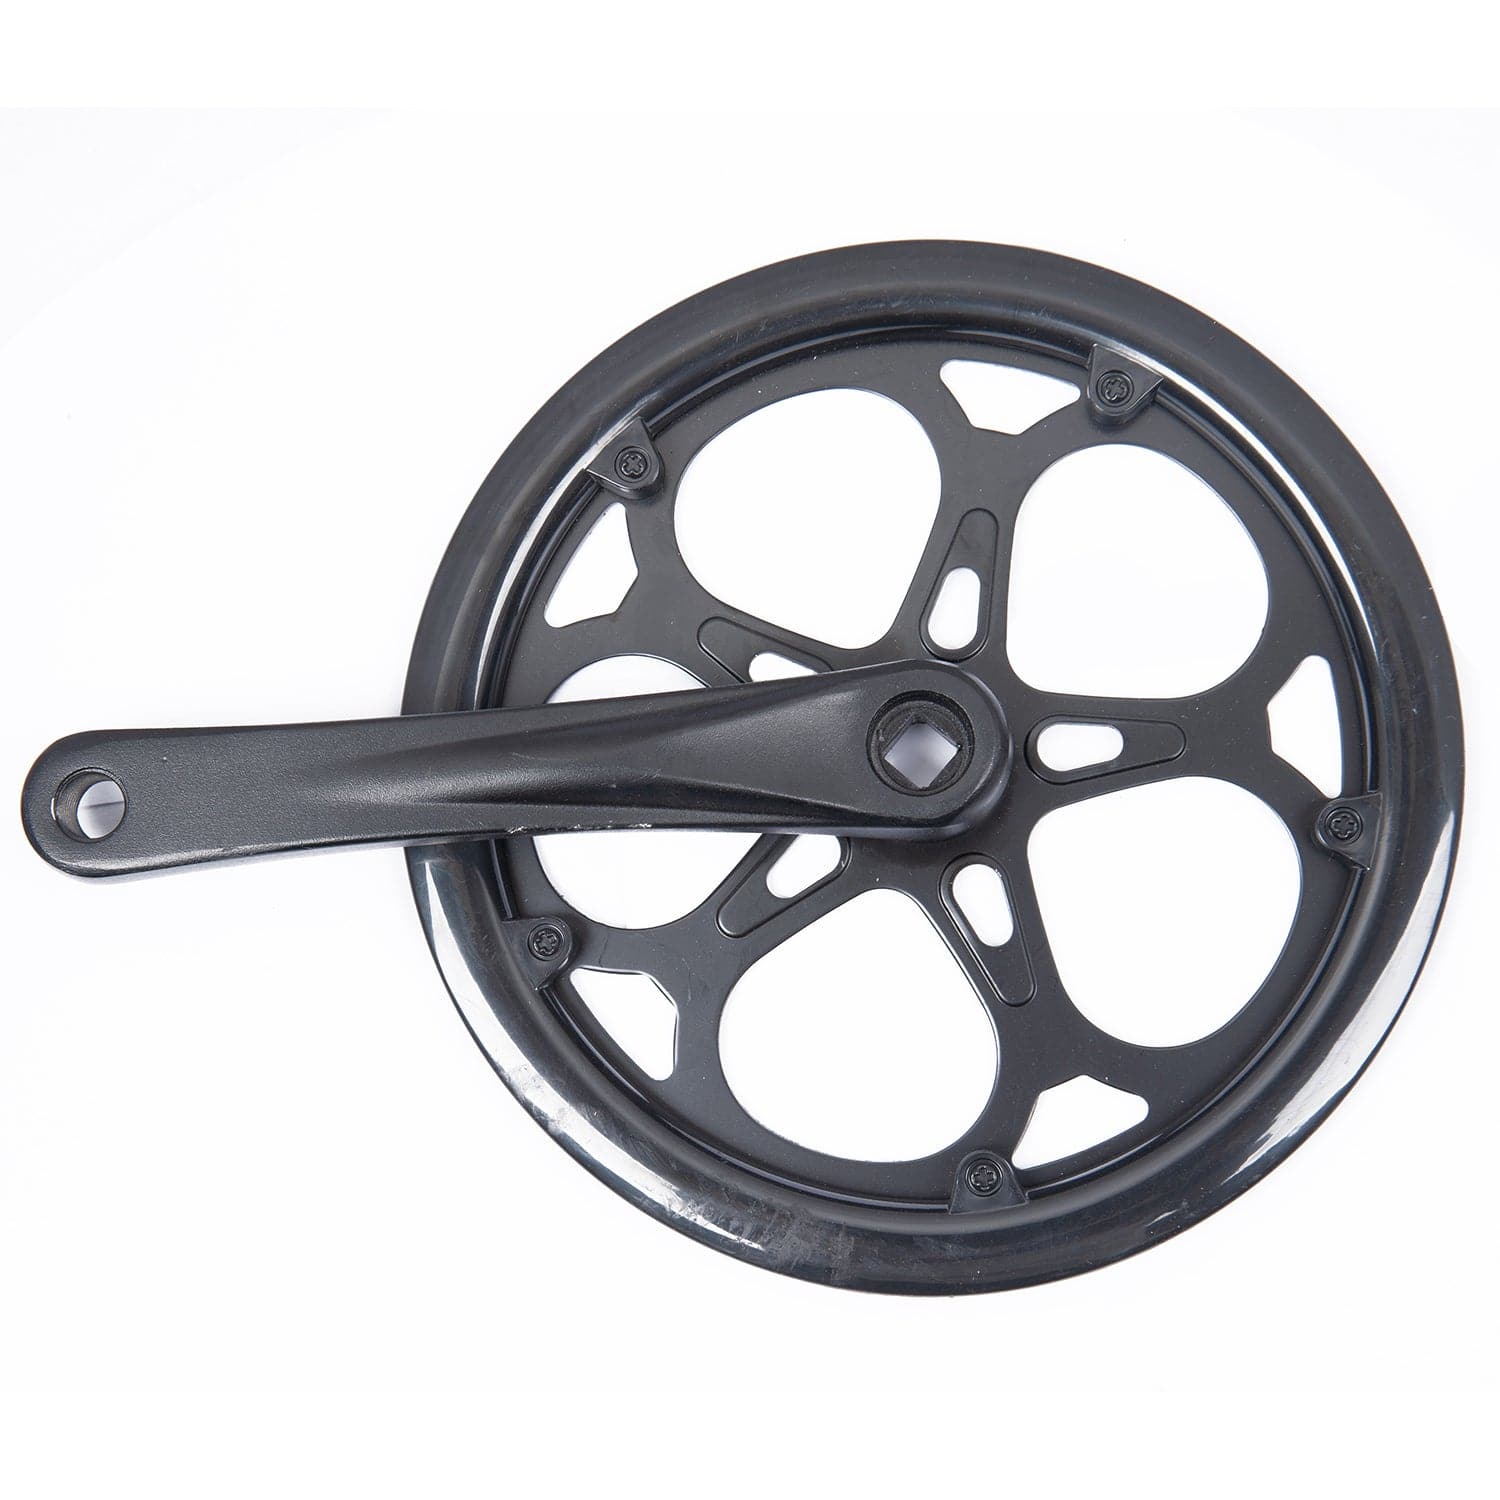 Crankset for PX1 PX5 PX6 Electric Bike ( 48T )